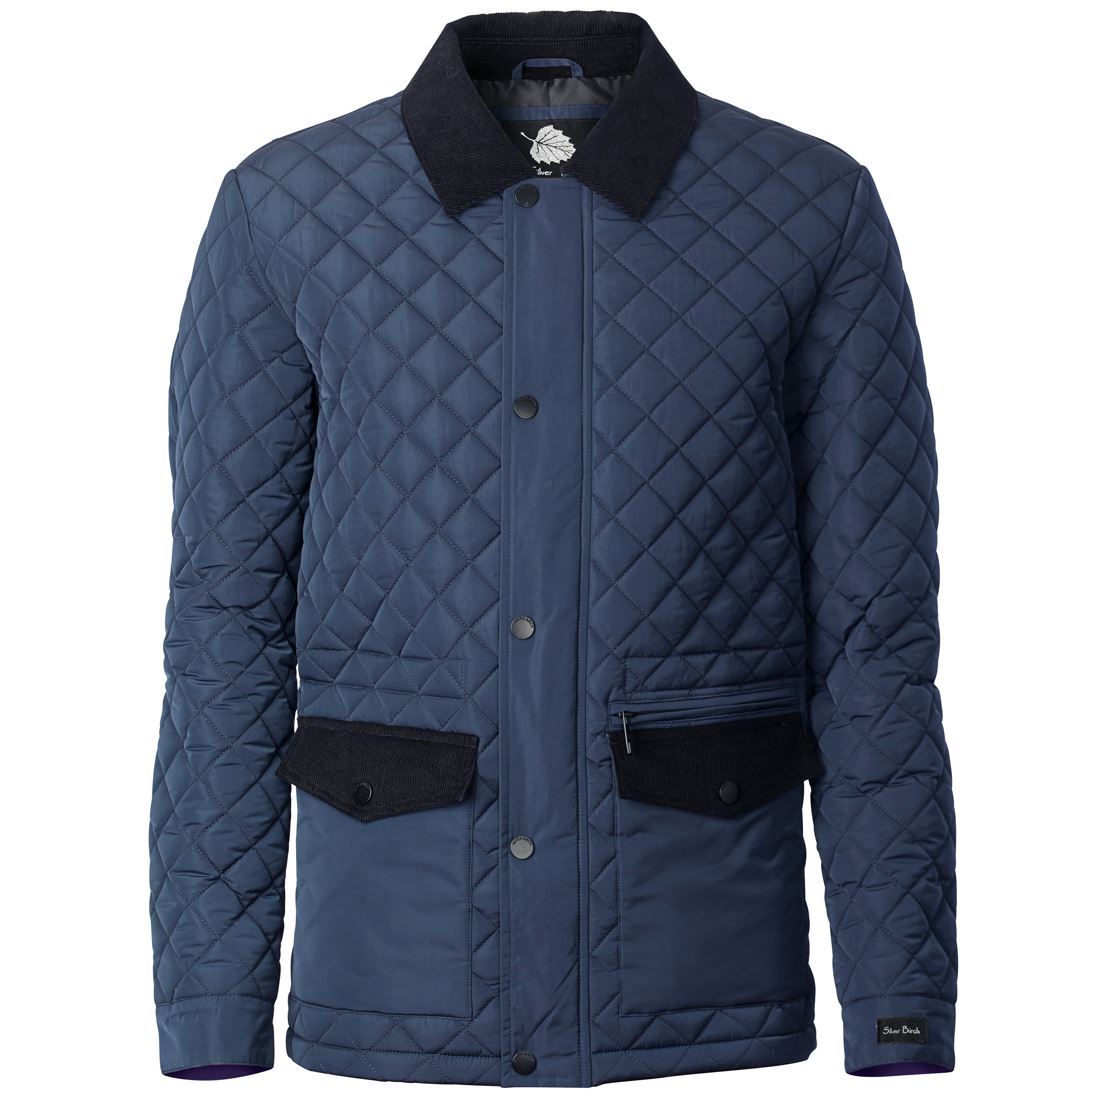 SILVER BIRCH Men's Diamond Quilted Classic Jacket with Corduroy Collar and Contrast Pockets - Mid-Weight Full Zip Up Softshell Padded Coat